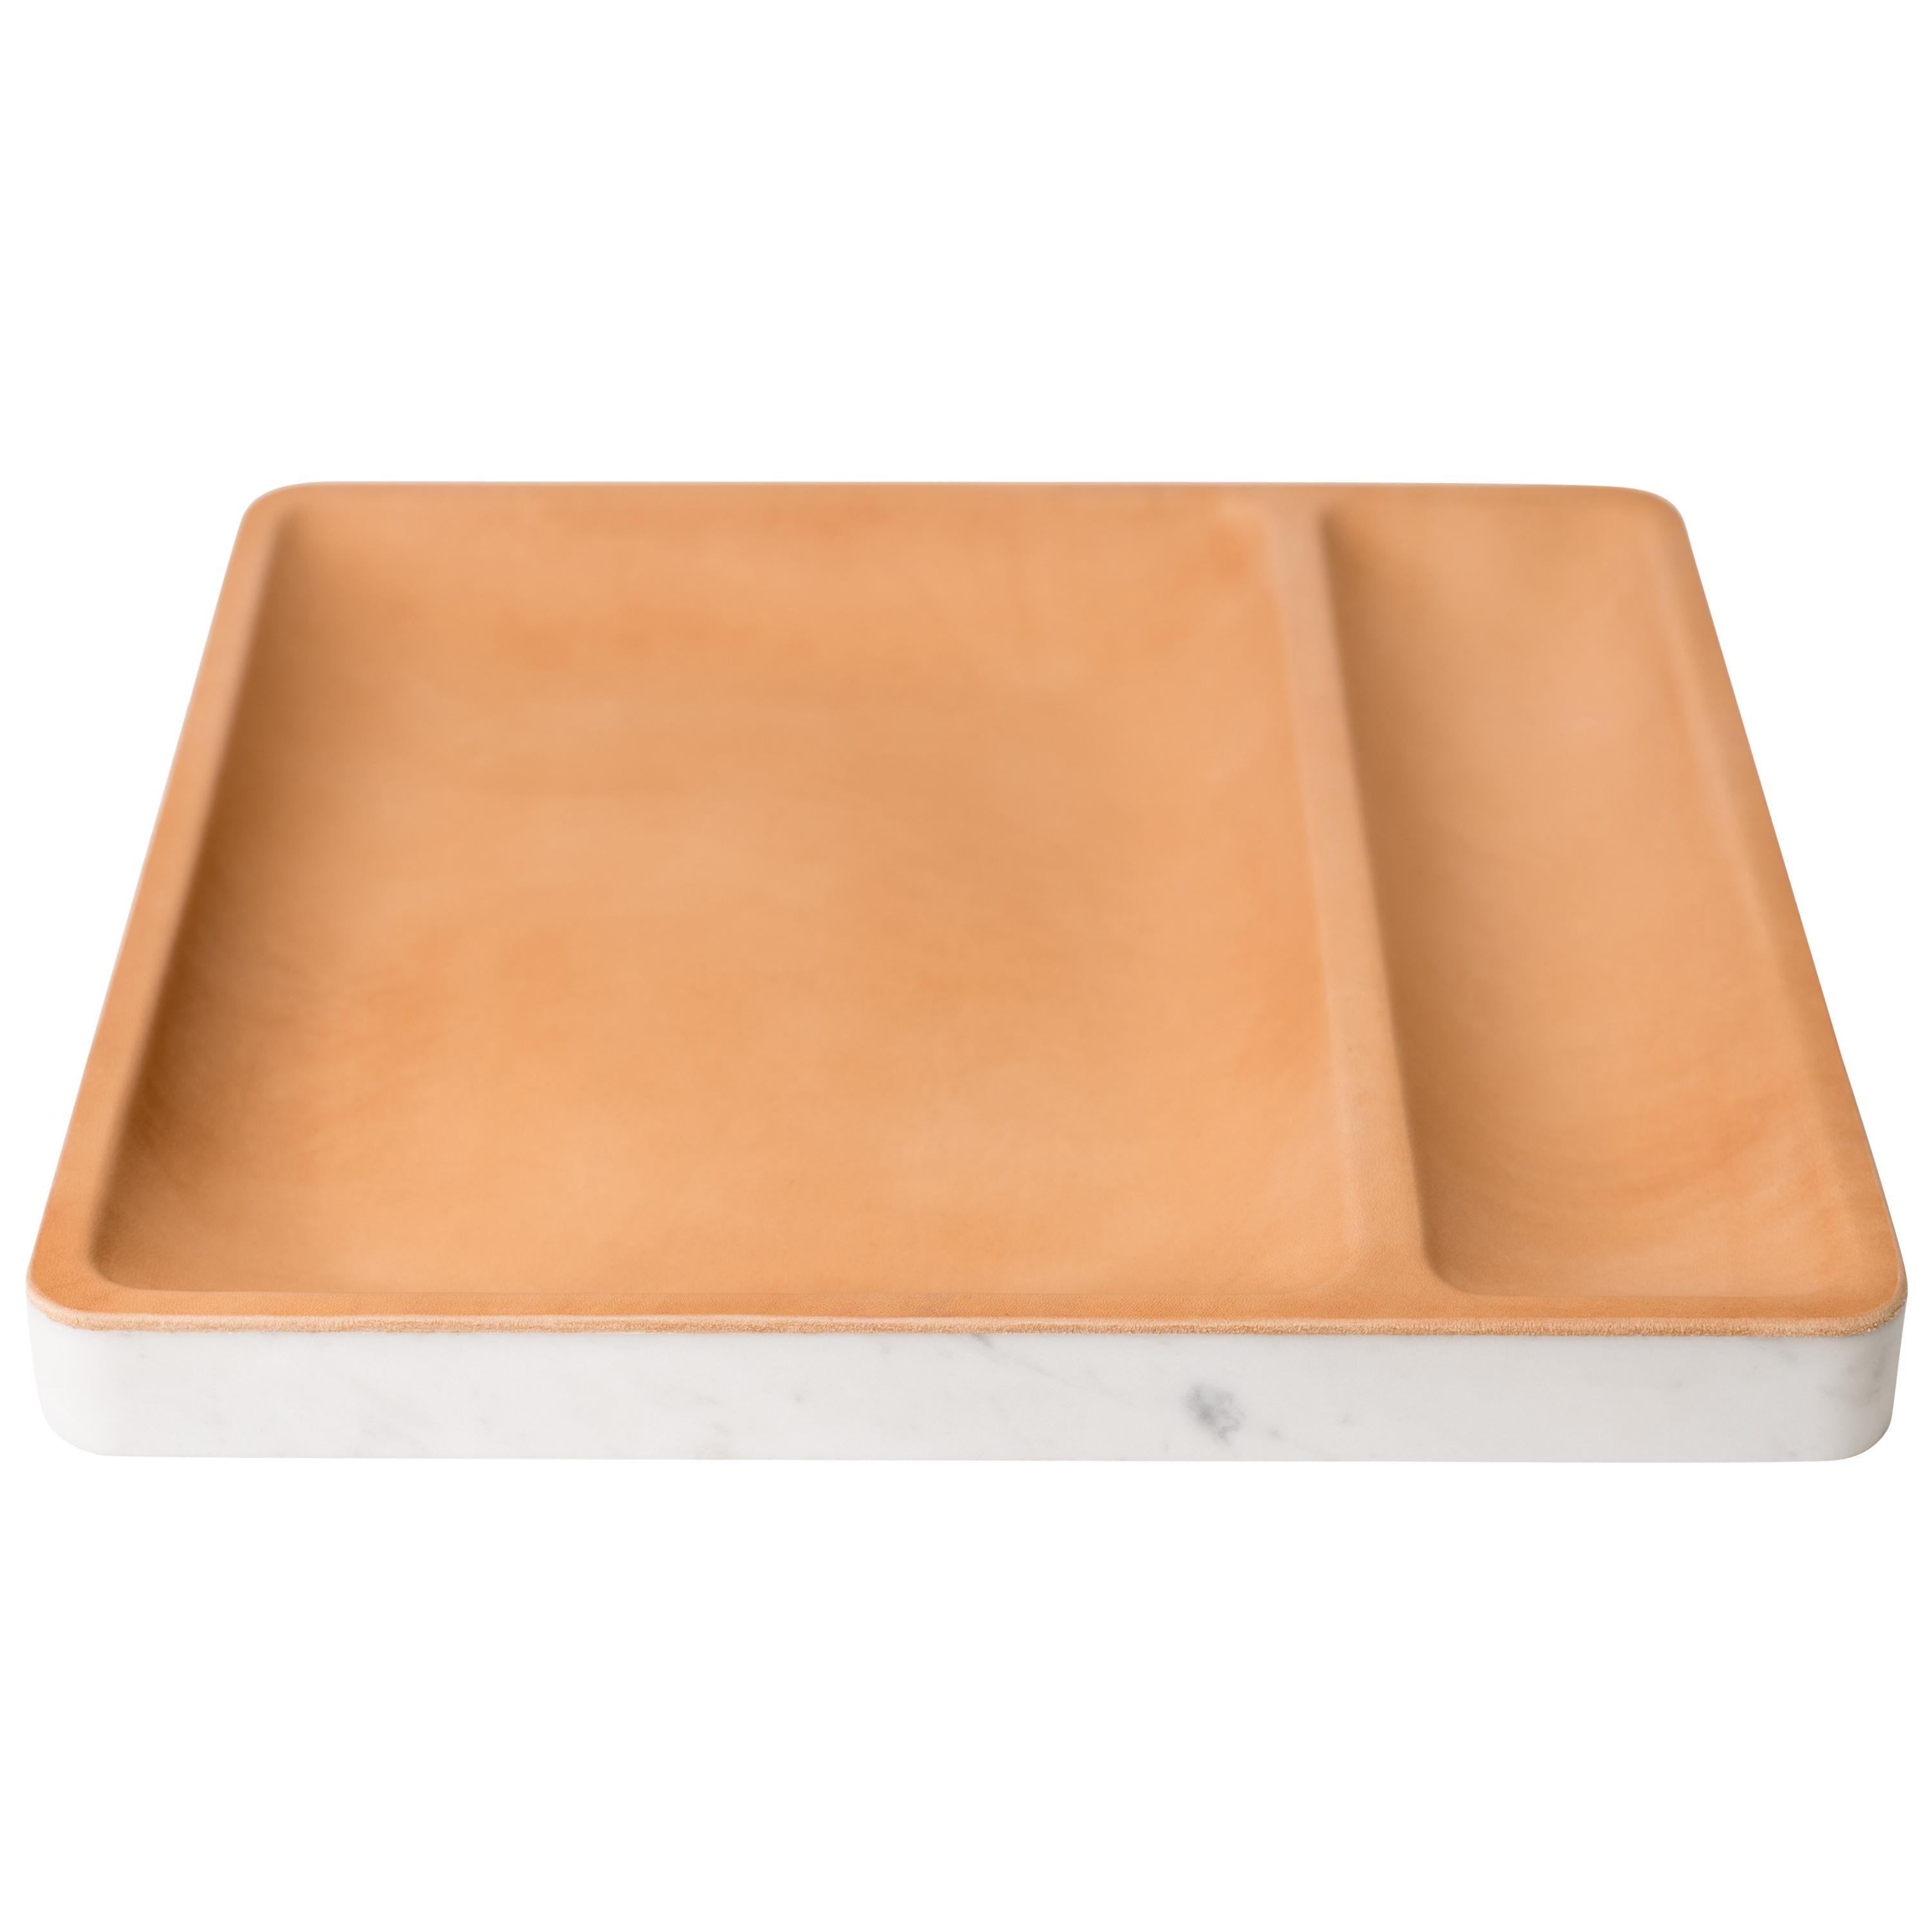 Draft Tray: Straight, Marble and Leather table top valet tray For Sale